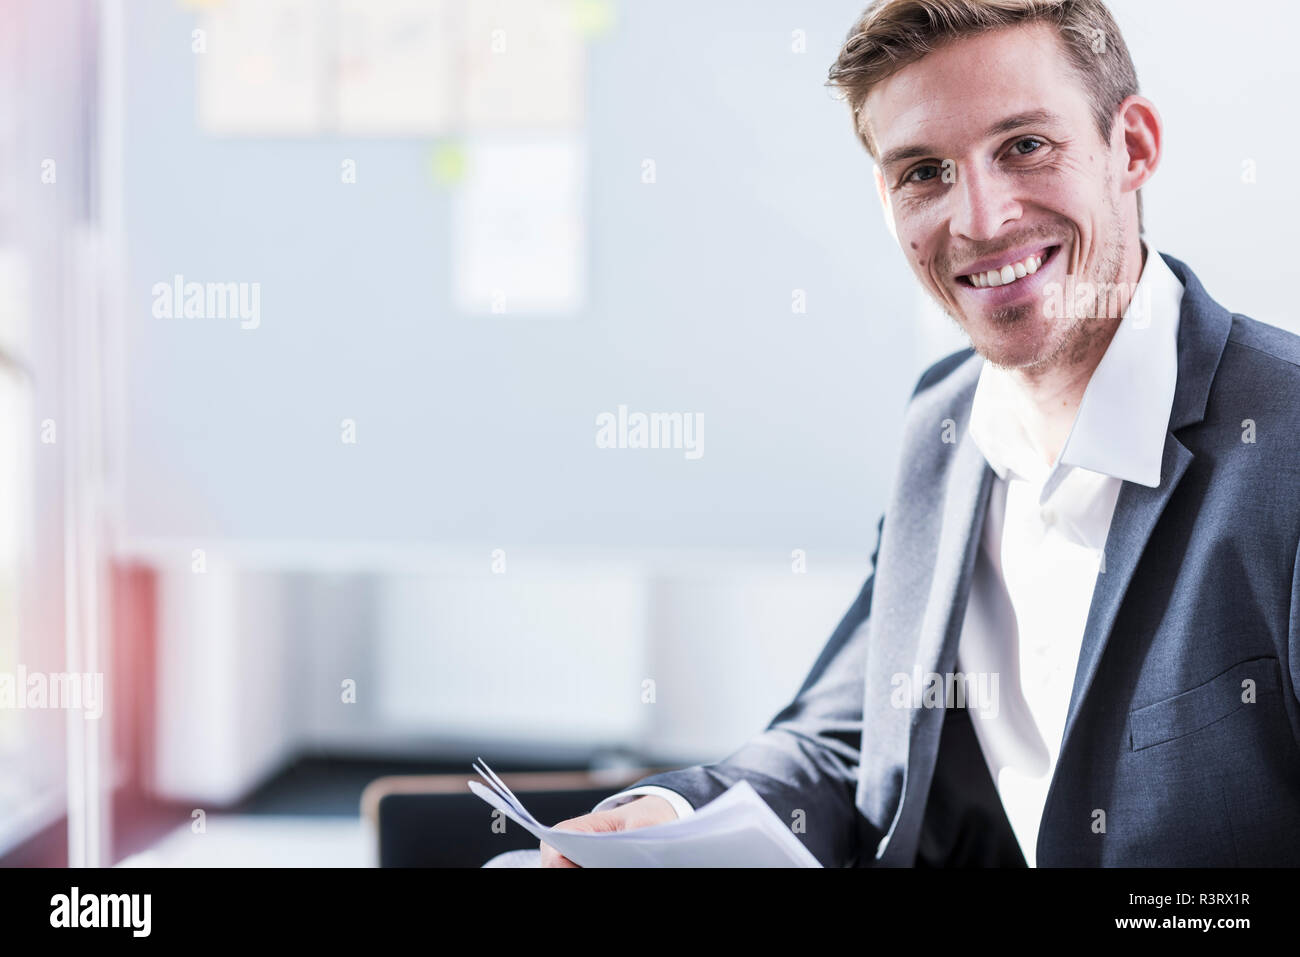 Portrait of smiling businessman in office Stock Photo